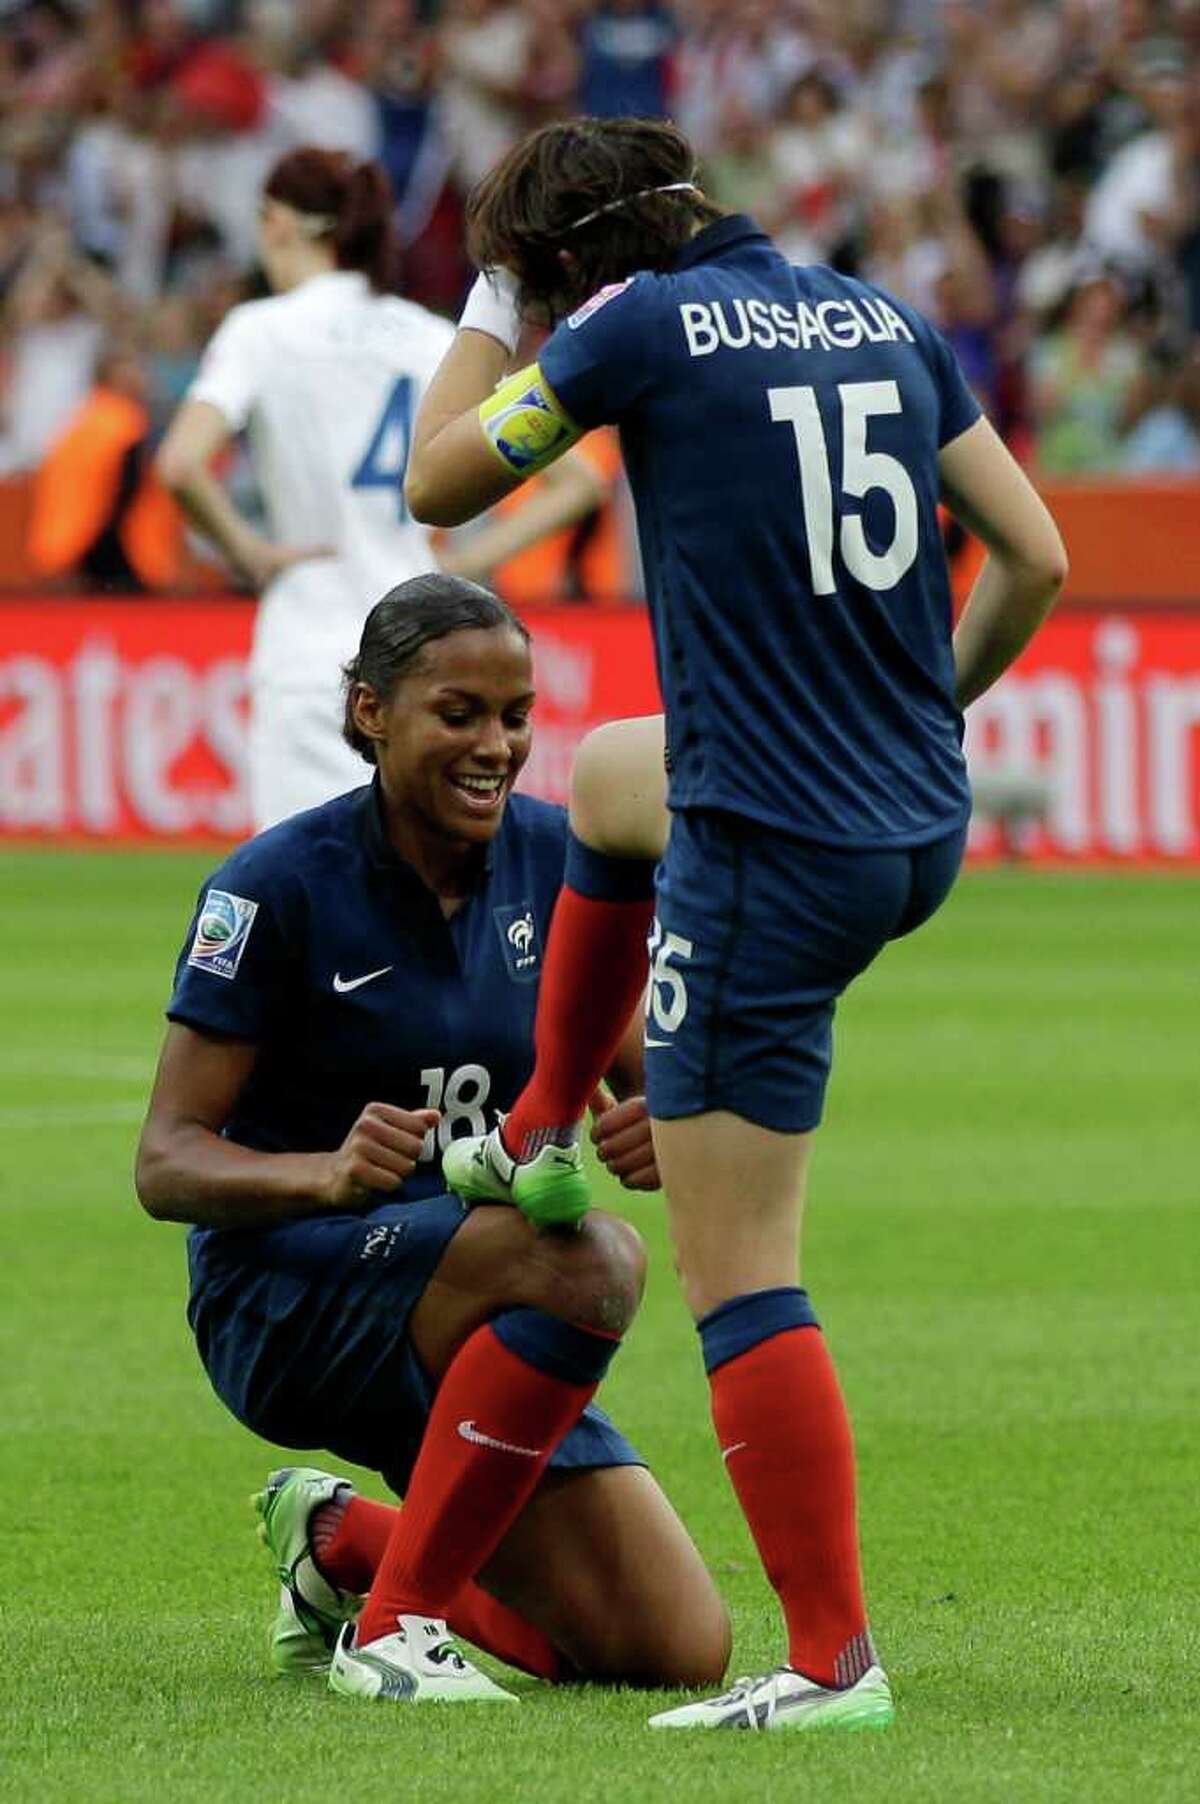 France's Marie-Laure Delie mockingly polishes Elise Bussaglia's shoe after she scored their side's first goal during the quarterfinal match between England and France at the Women?s Soccer World Cup in Leverkusen, Germany, Saturday, July 9, 2011. (AP Photo/Frank Augstein)